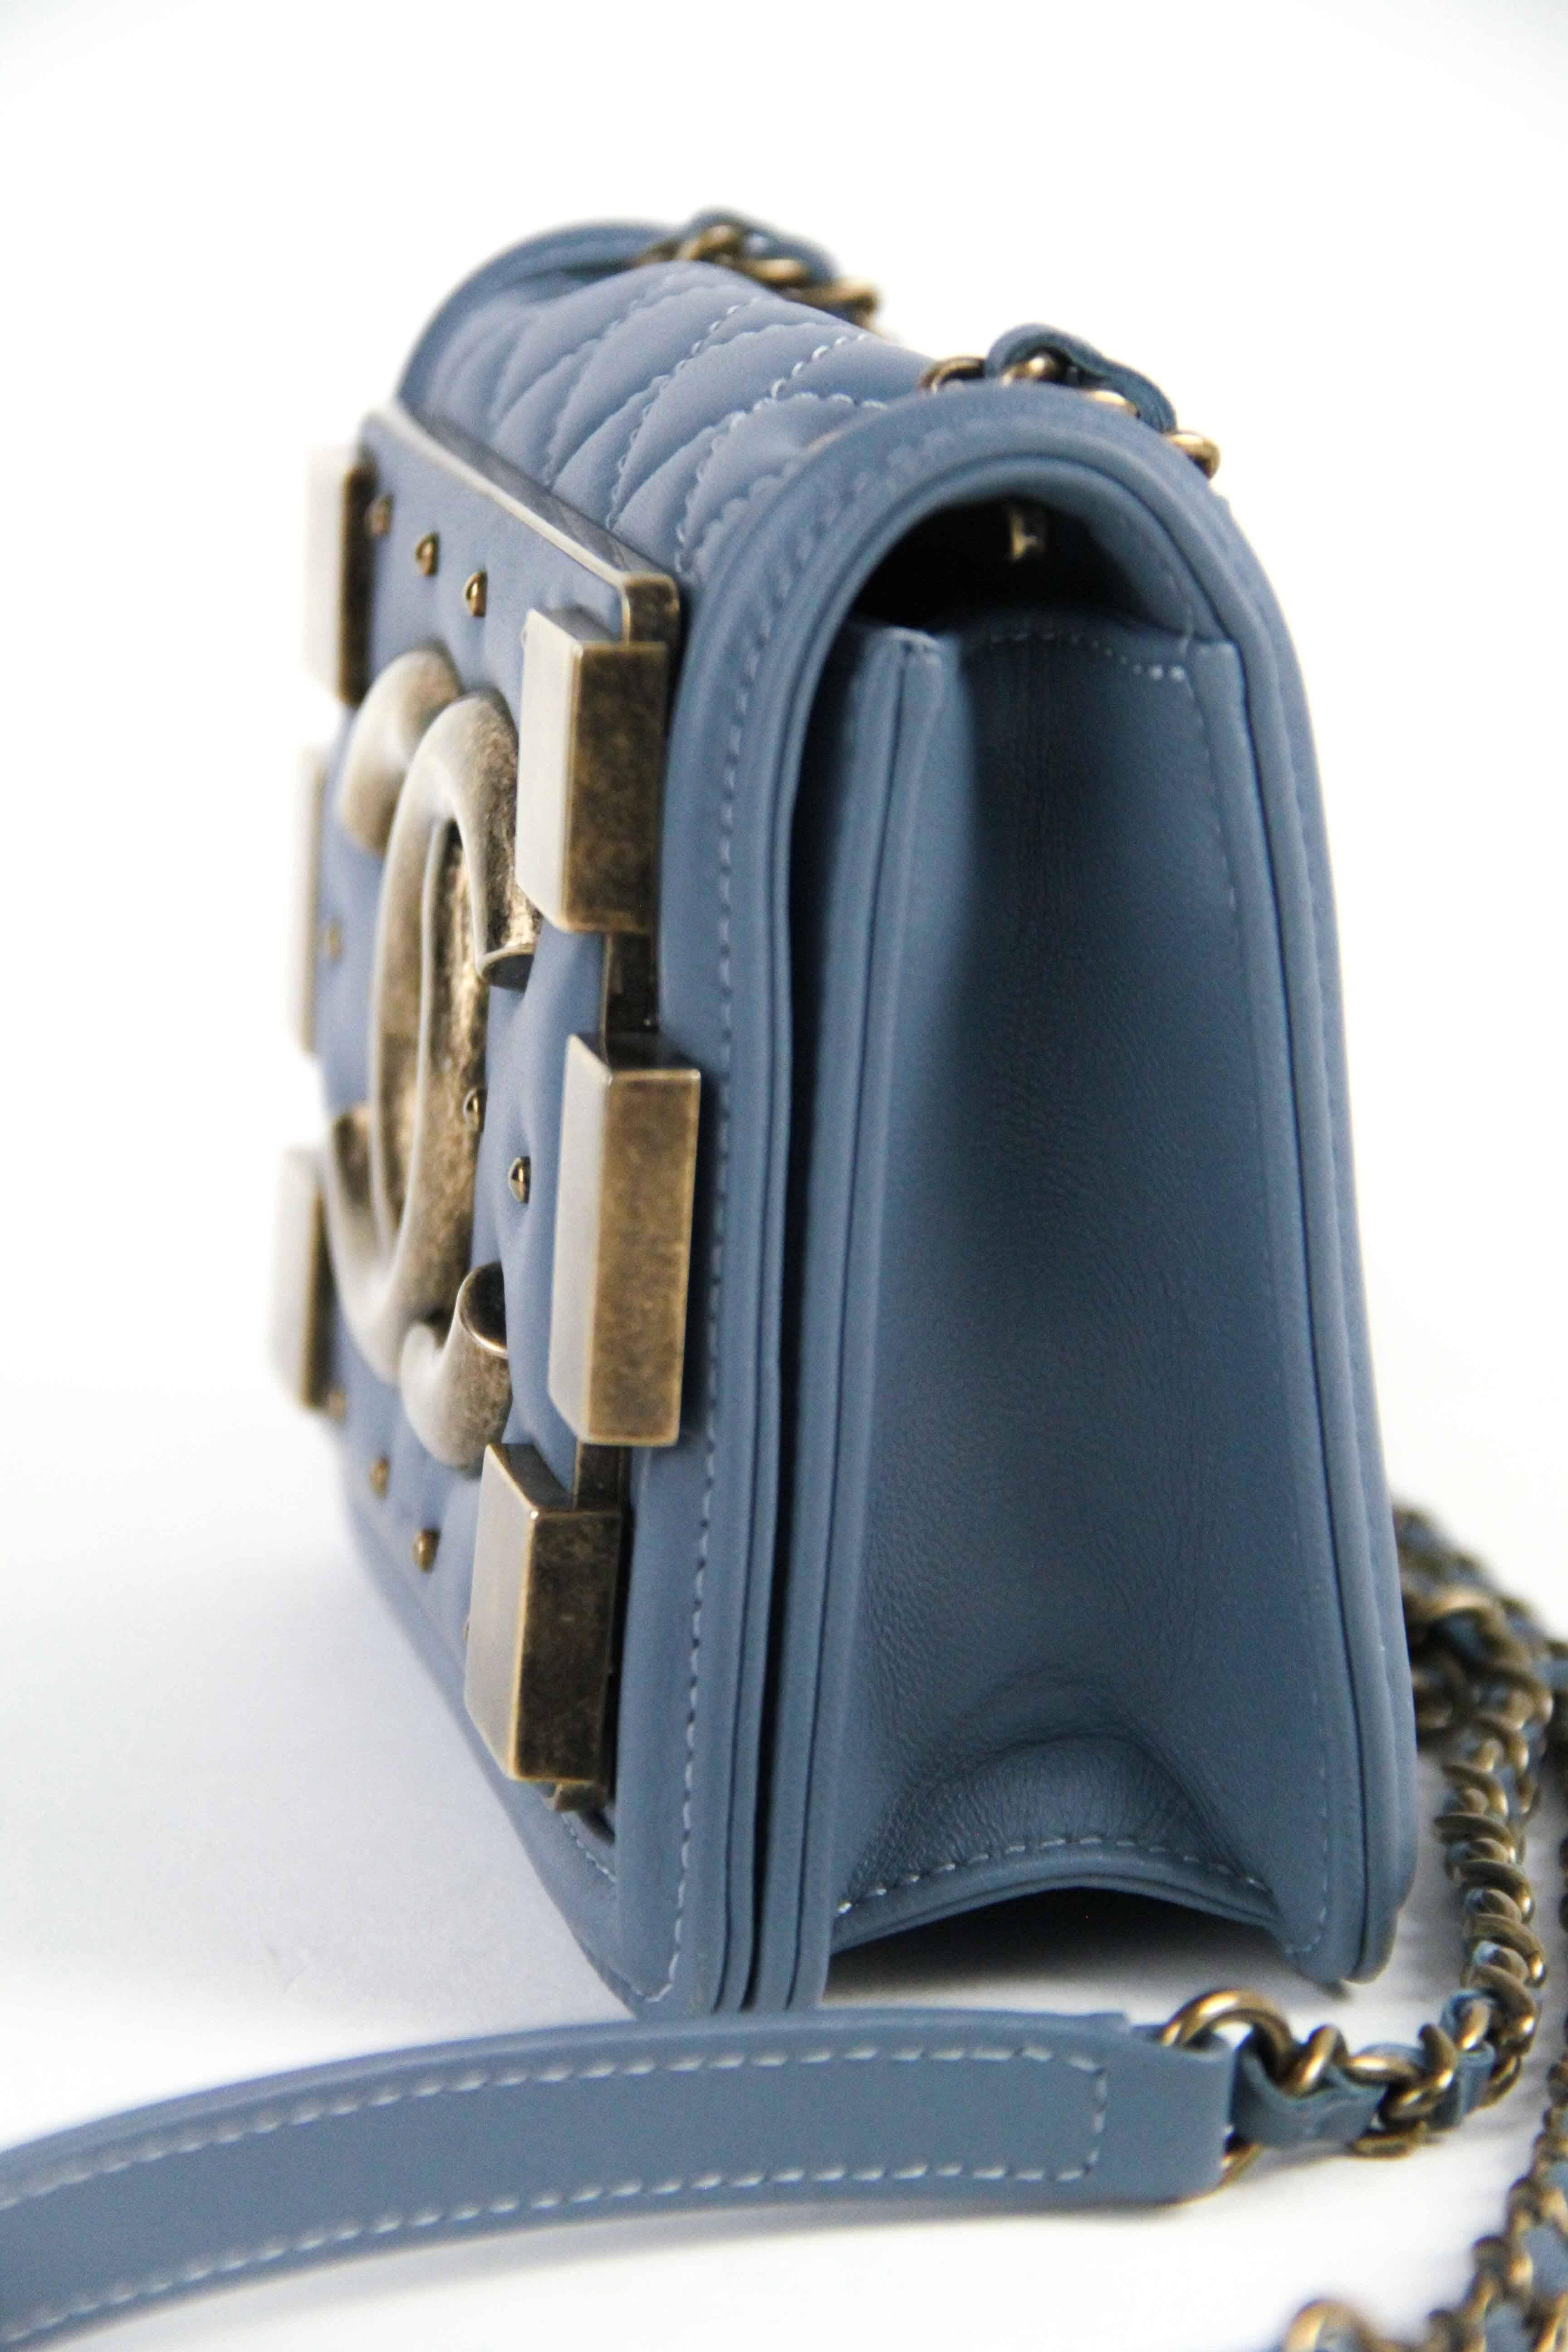 Offered is this darling Chanel Boy Bag with a brick flap with Gold-tone hardware. Blue jean color lambskin accented with aged gold-tone CC logo, Chain shoulder stap with flat leather at shoulder.  This style is one of the most in demand sillouettes